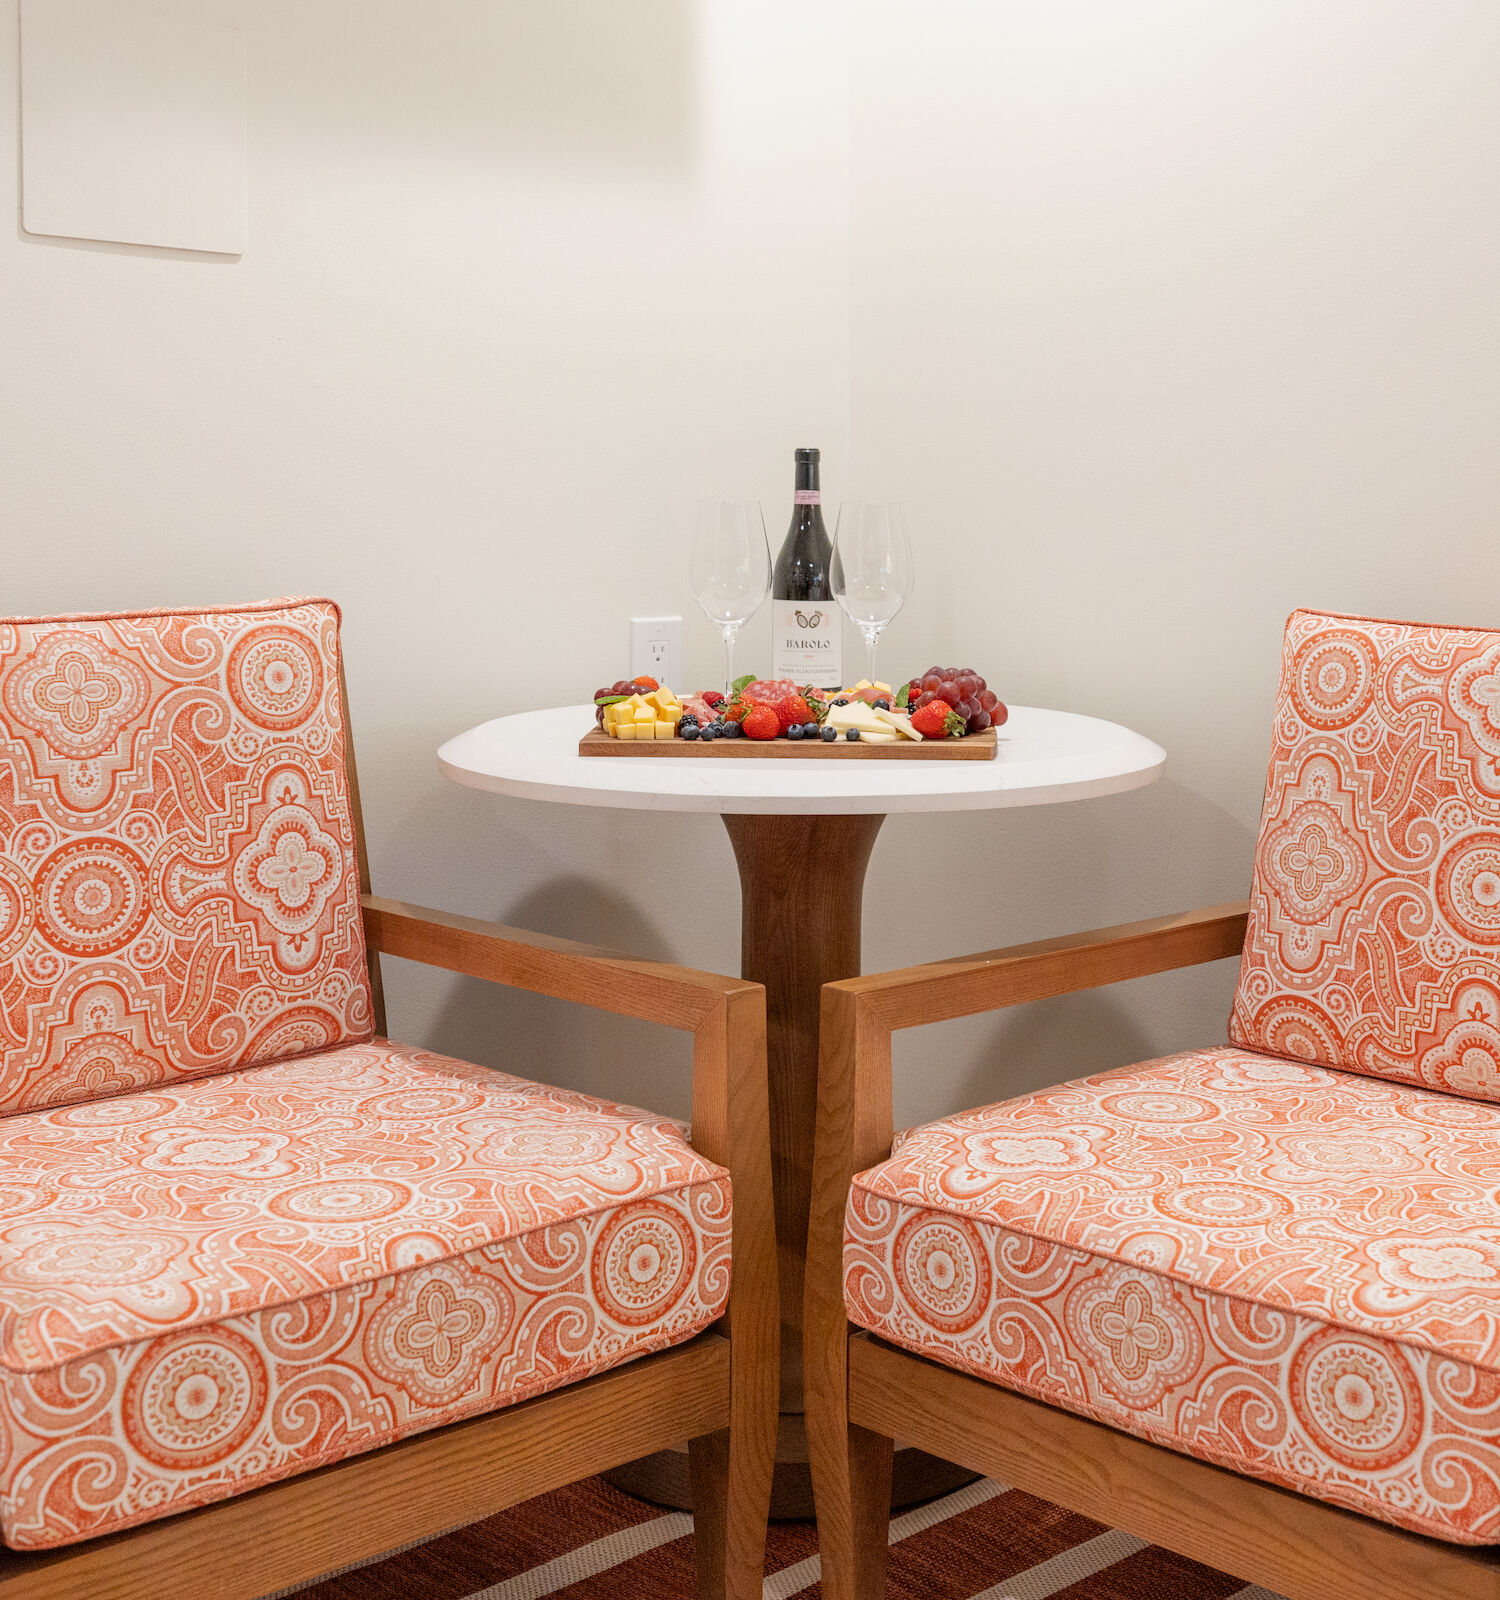 Two orange patterned armchairs and a small round table with wine, glasses, and fruit are placed in a corner.